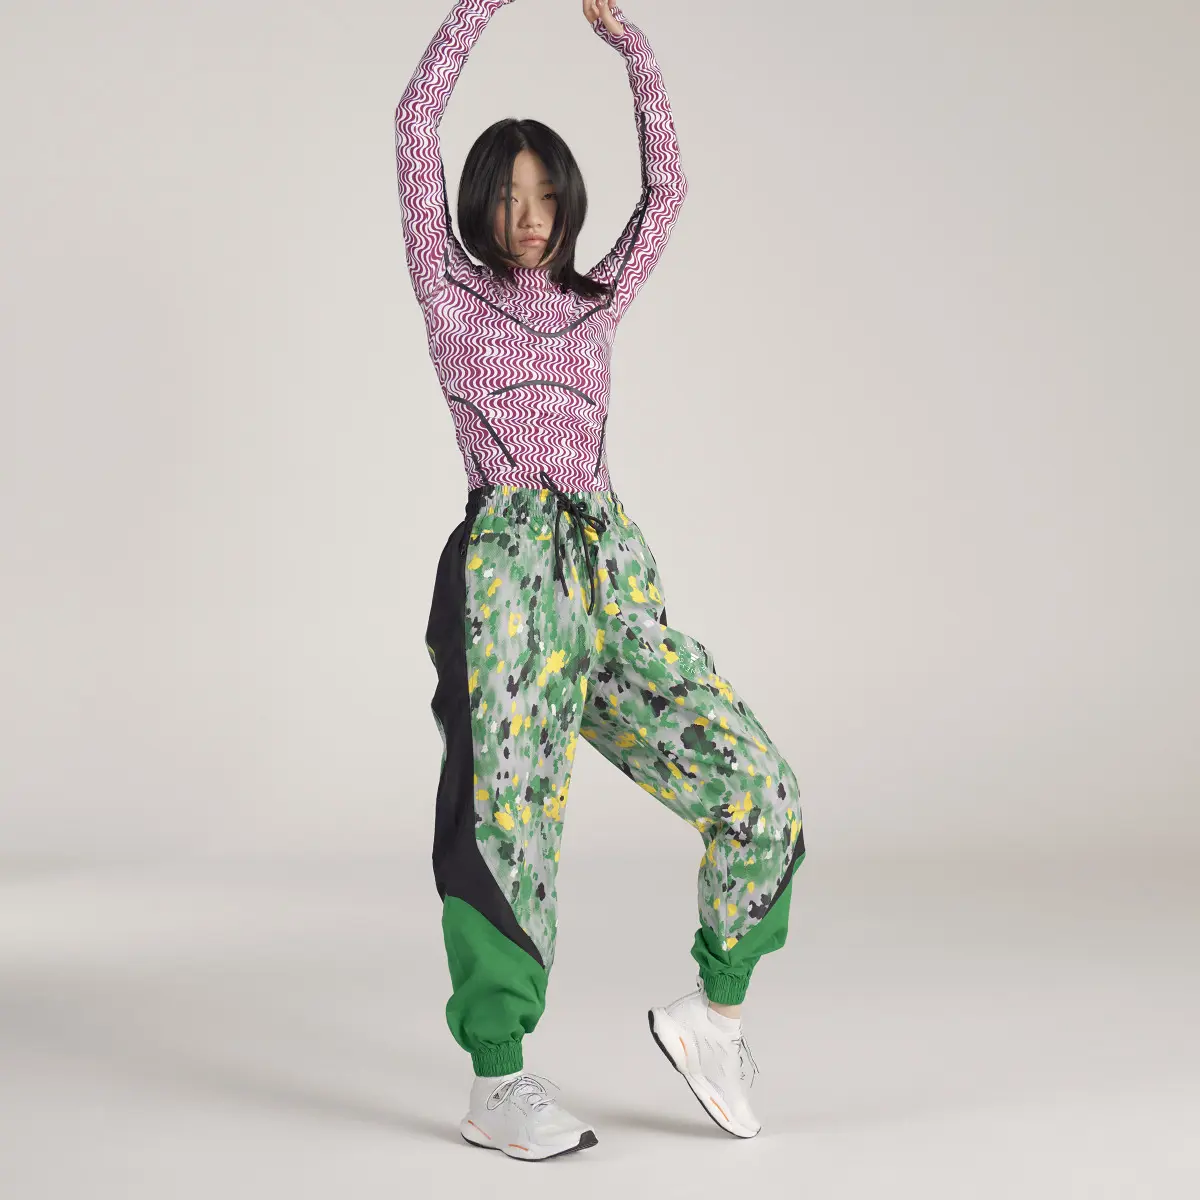 Adidas by Stella McCartney Printed Woven Tracksuit Bottoms. 1